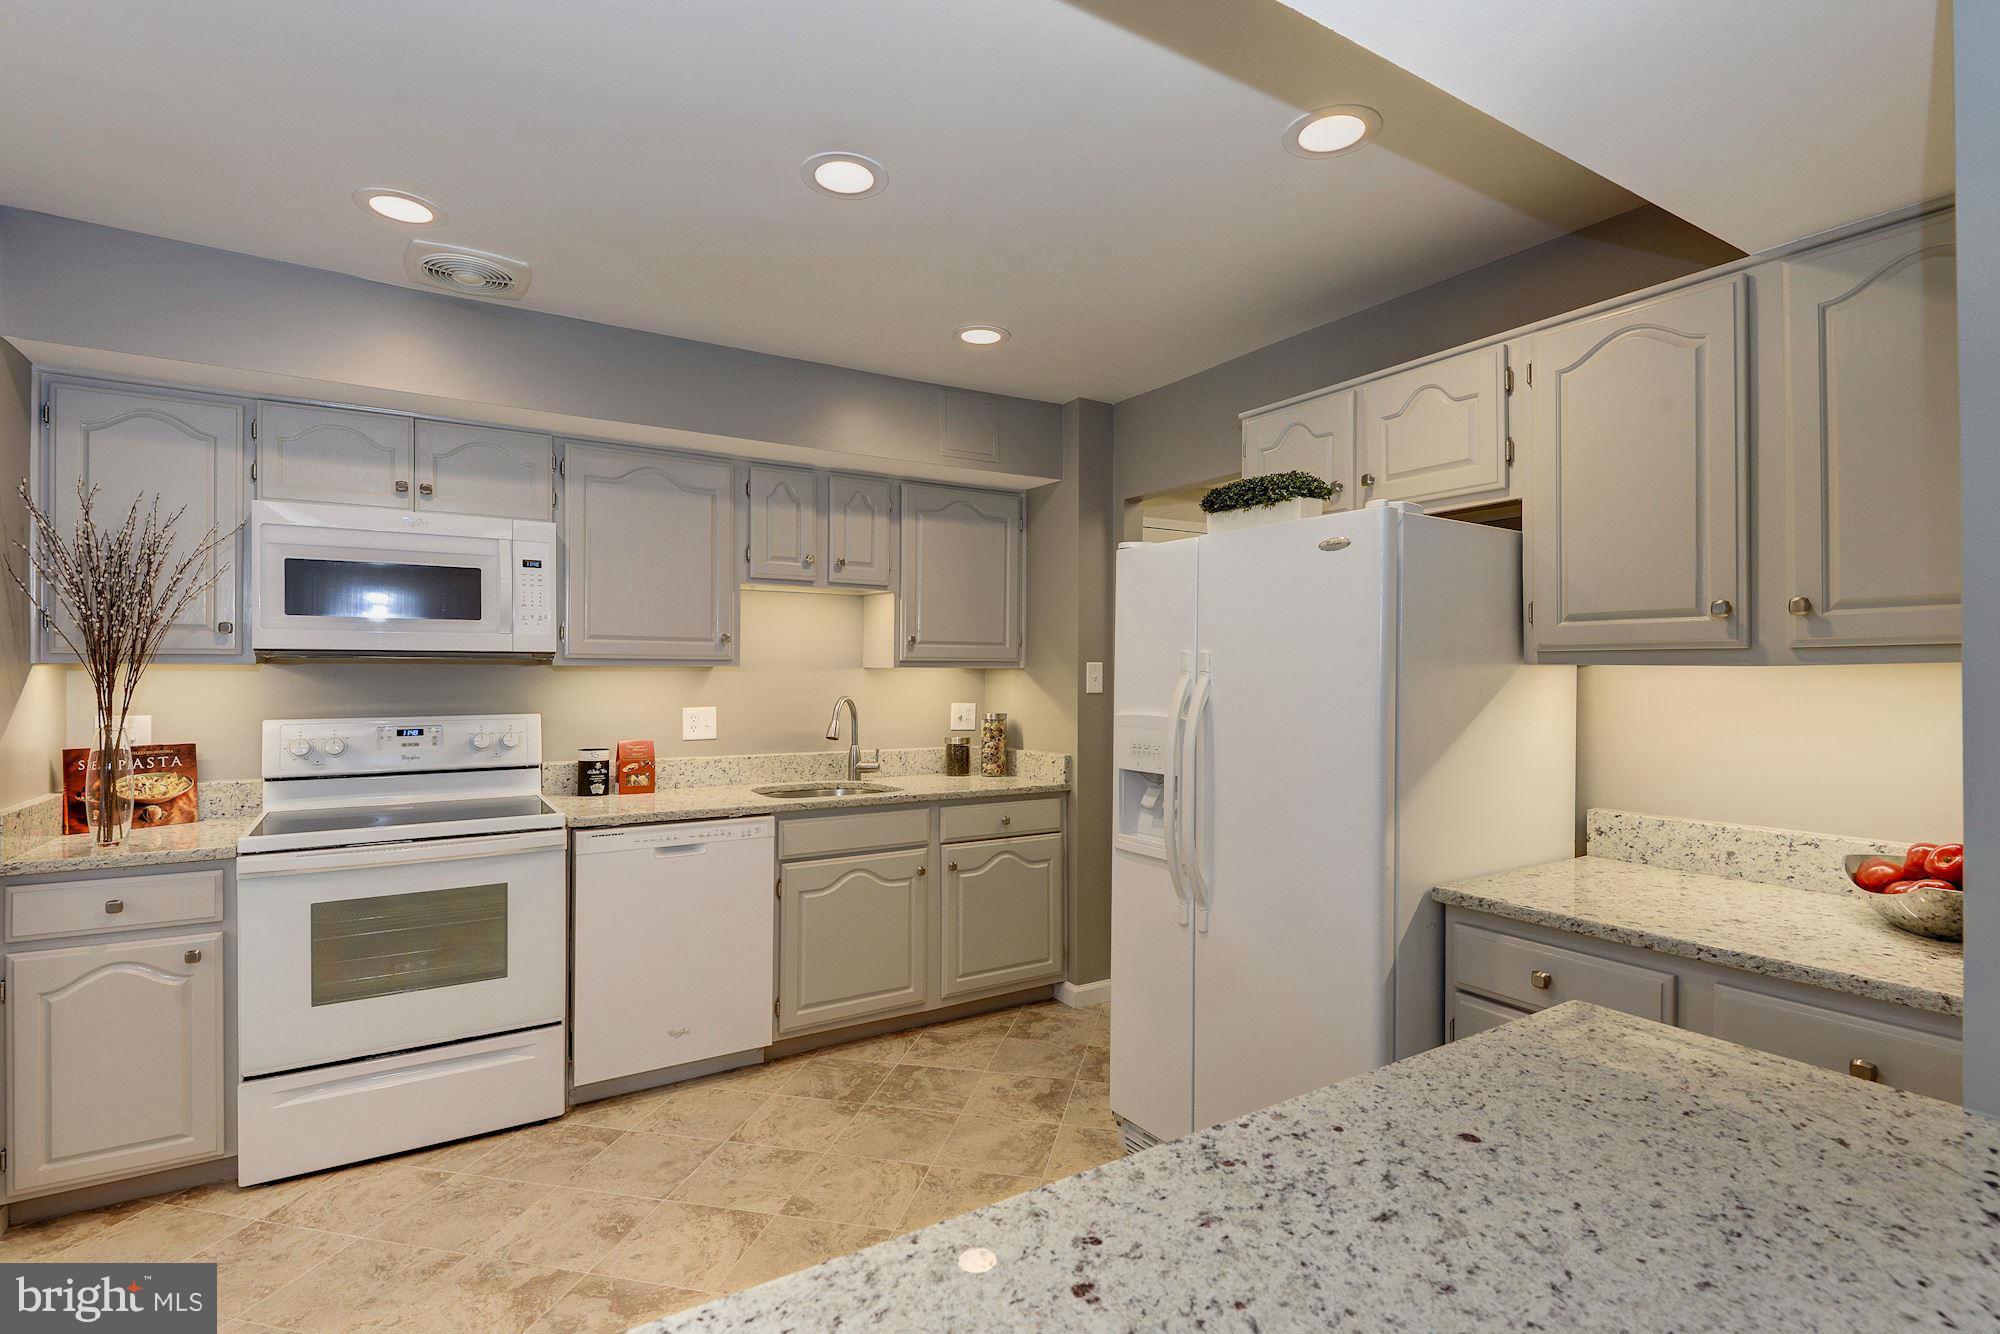 a kitchen with cabinets and stainless steel appliances